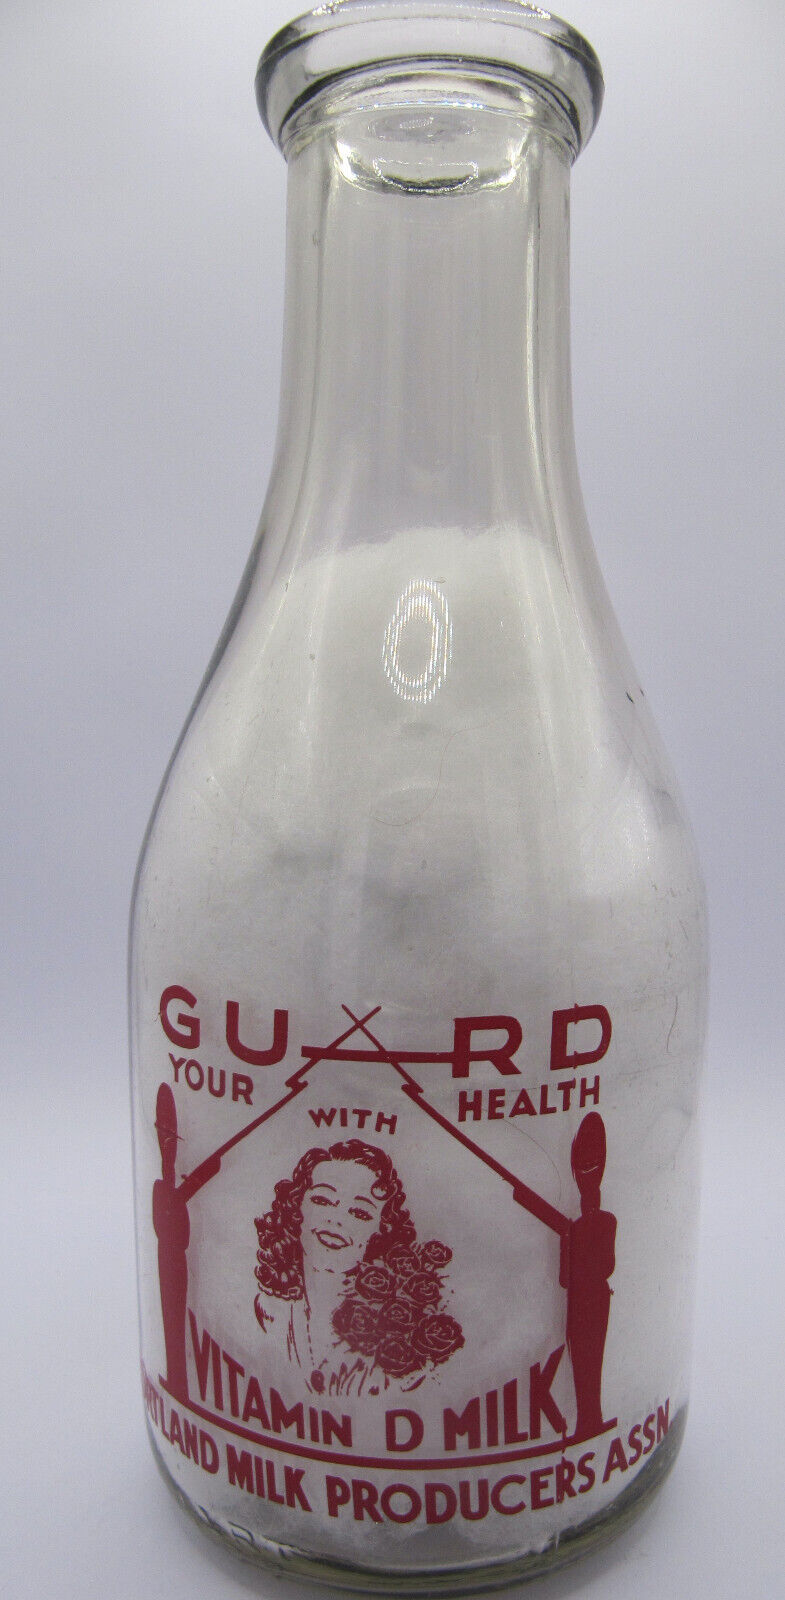 Vintage bottle, PORTLAND MILK PRODUCERS, Guard Your Health, RMB Collectables